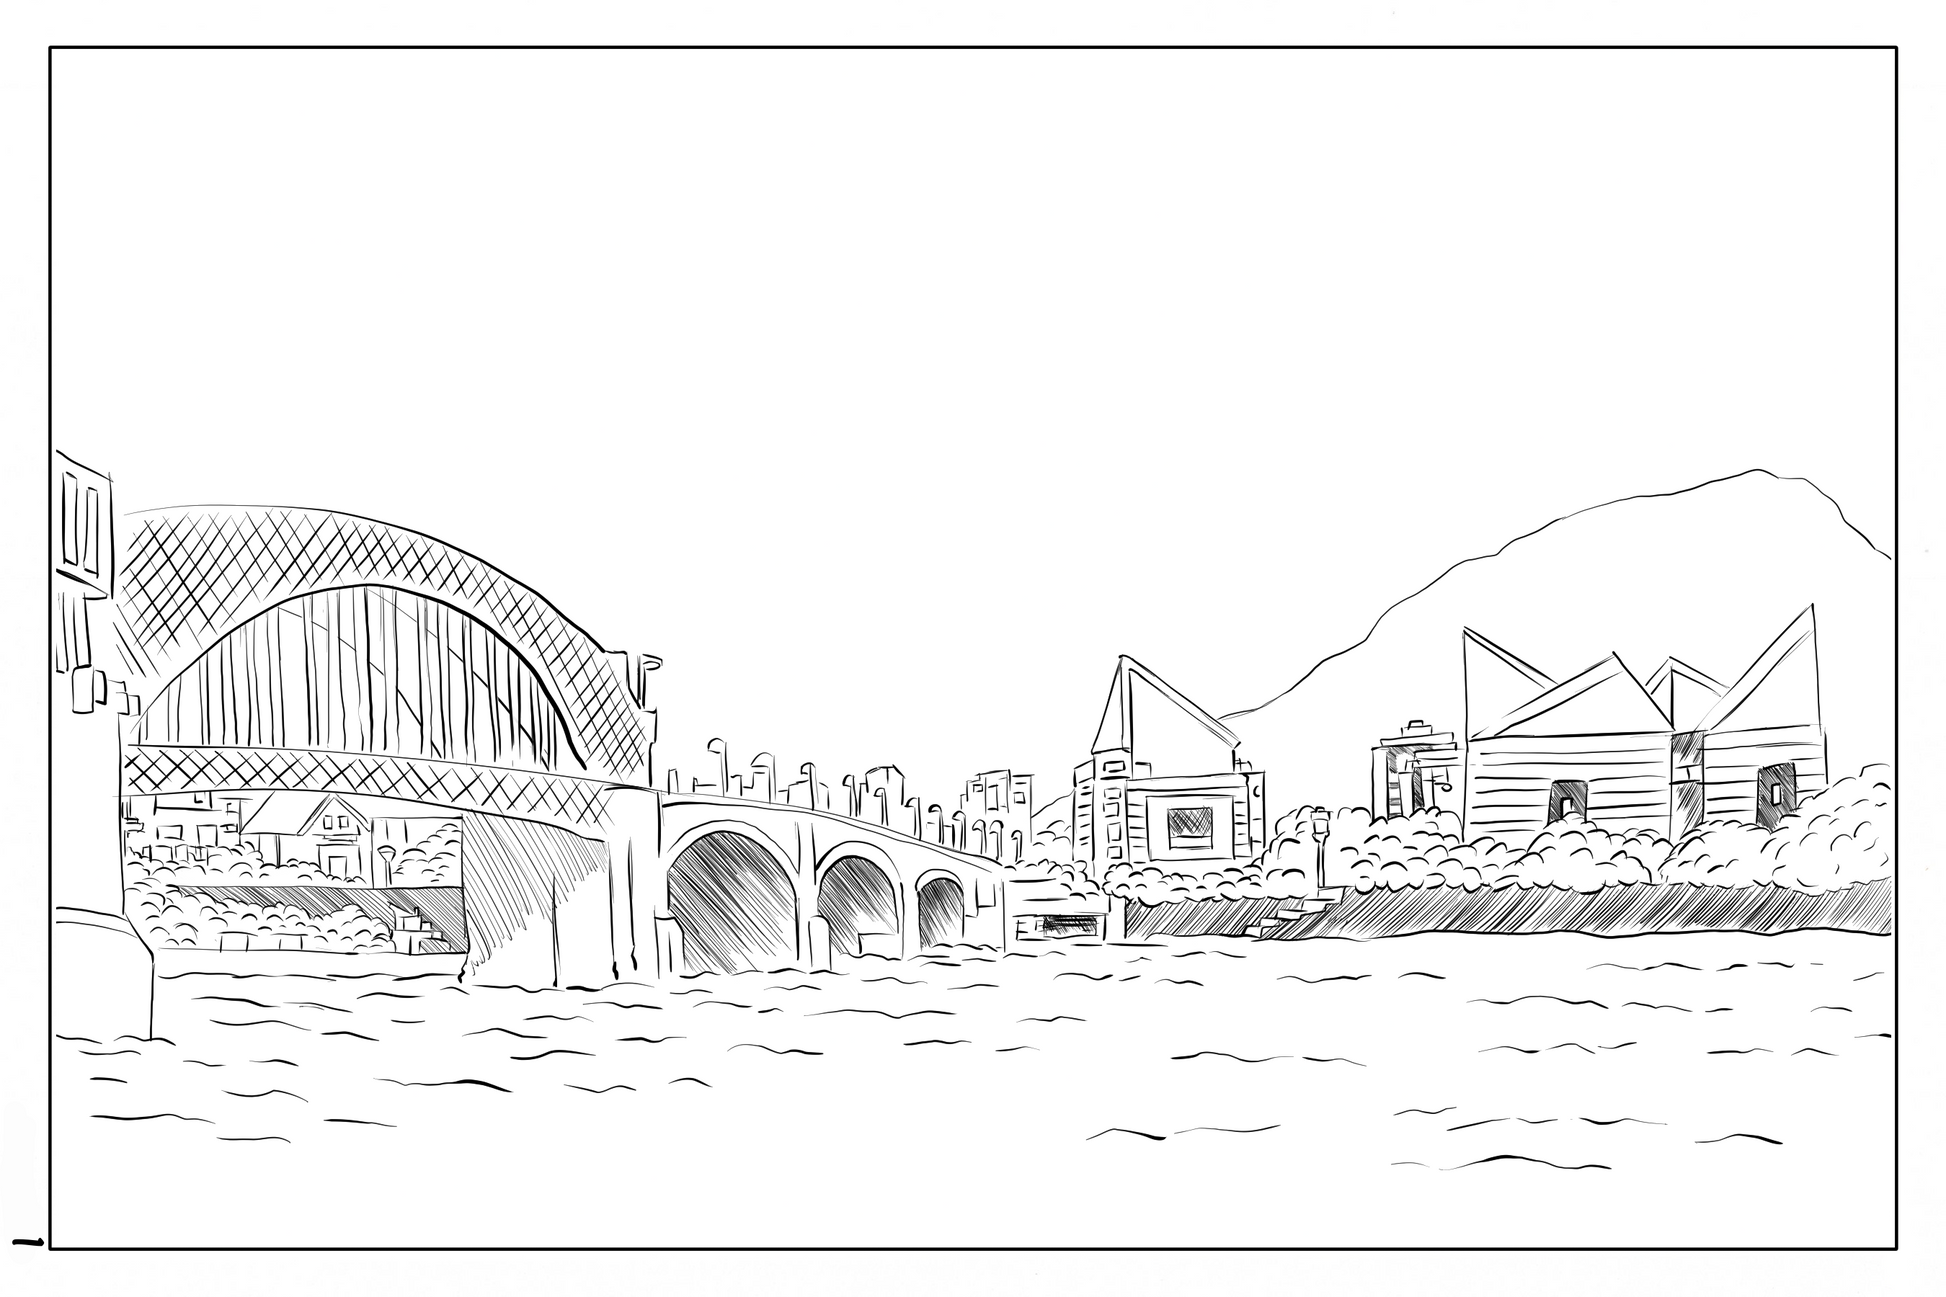 watercolor coloring page for Chattanooga riverfront in front of the Tennessee Aquarium, 140lbs cold pressed watercolor paper